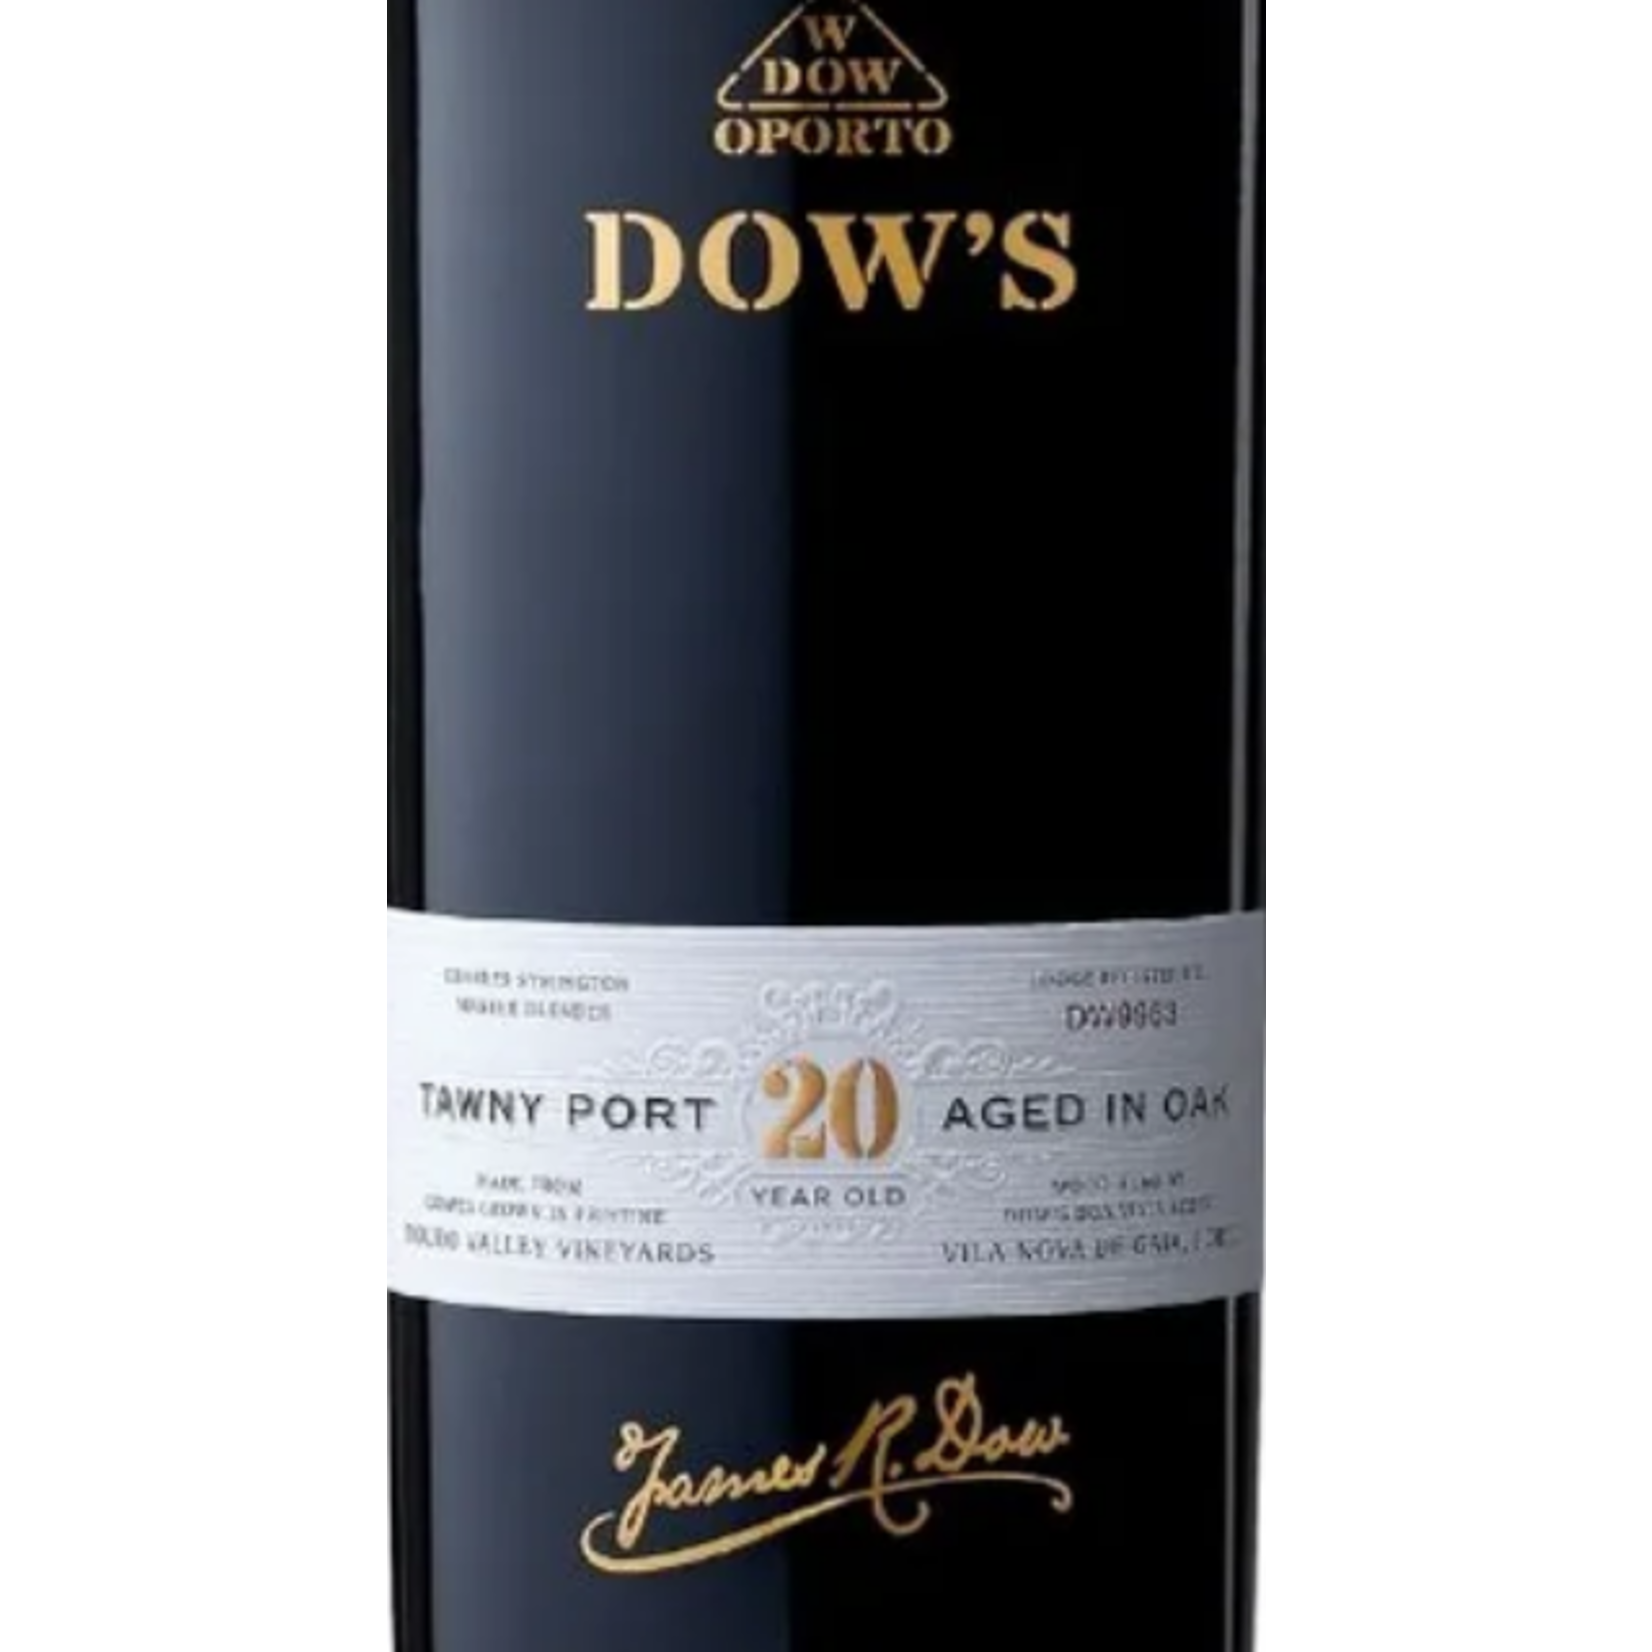 Dow's 20 Year Old Tawny Port Portugal 94pts-D, 93pts-WS, 91pts-WE